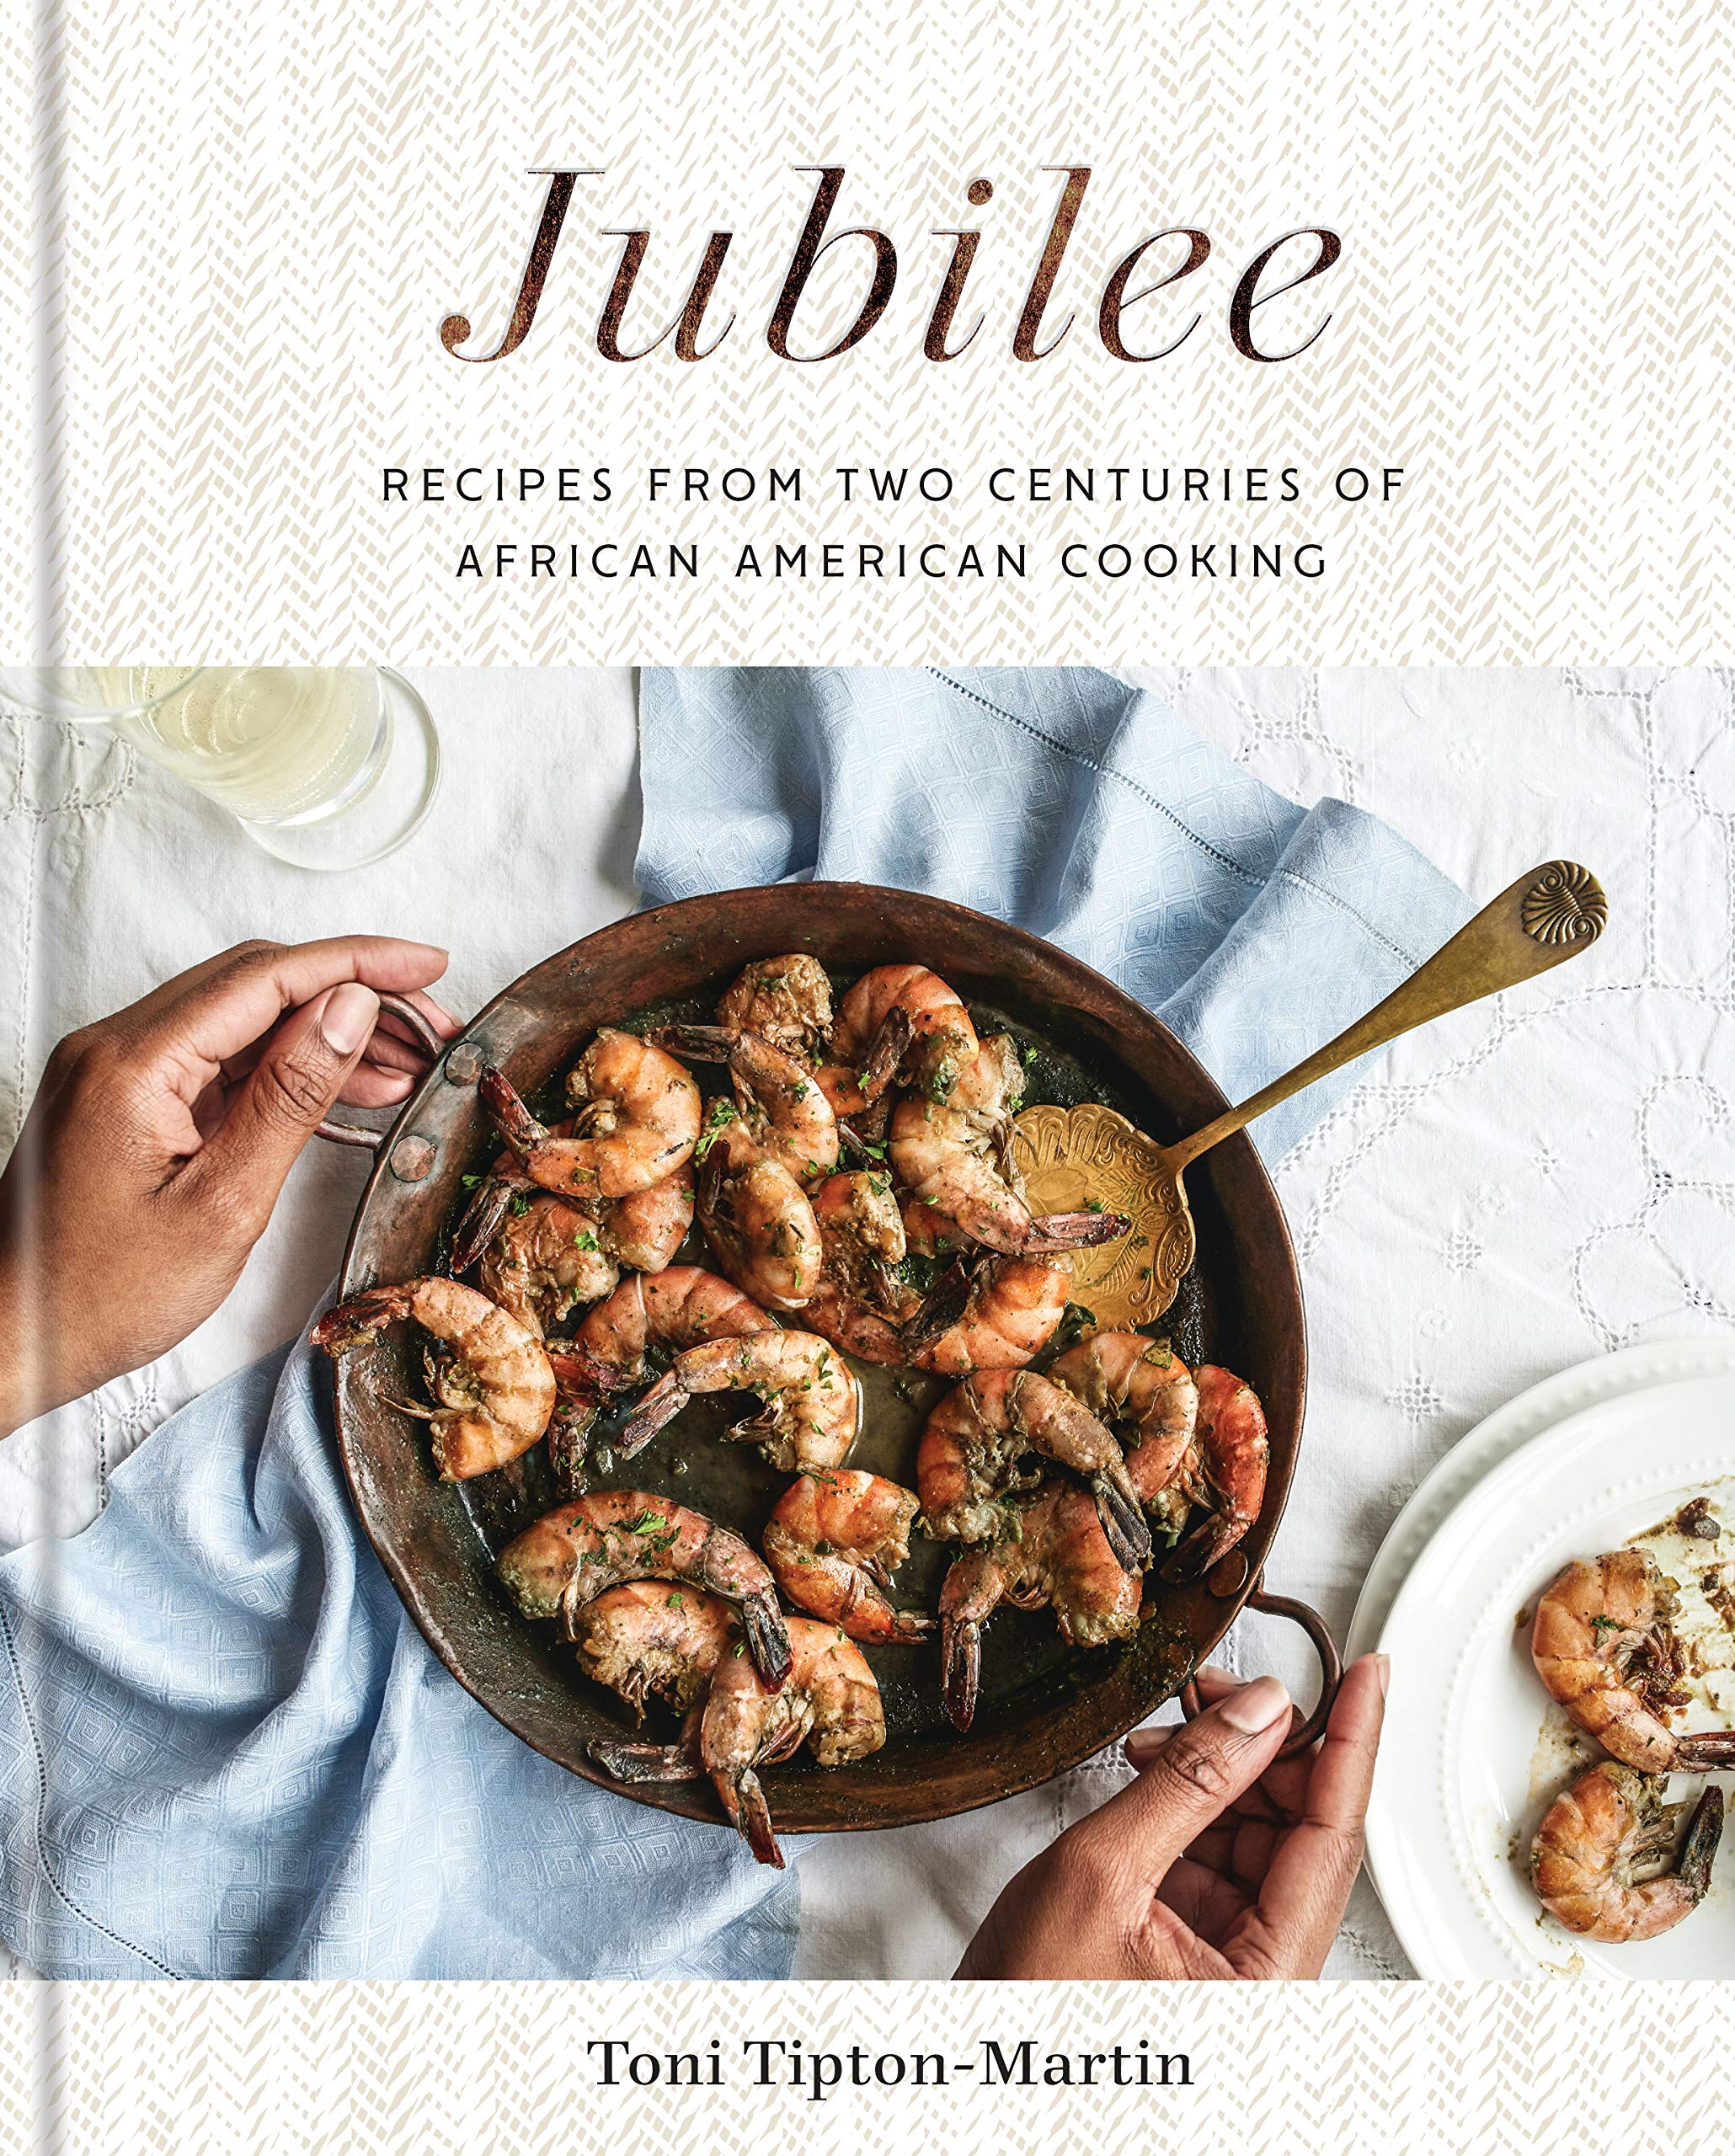 Jubilee: Recipes from Two Centuries of African-American Cooking (Toni Tipton-Martin)